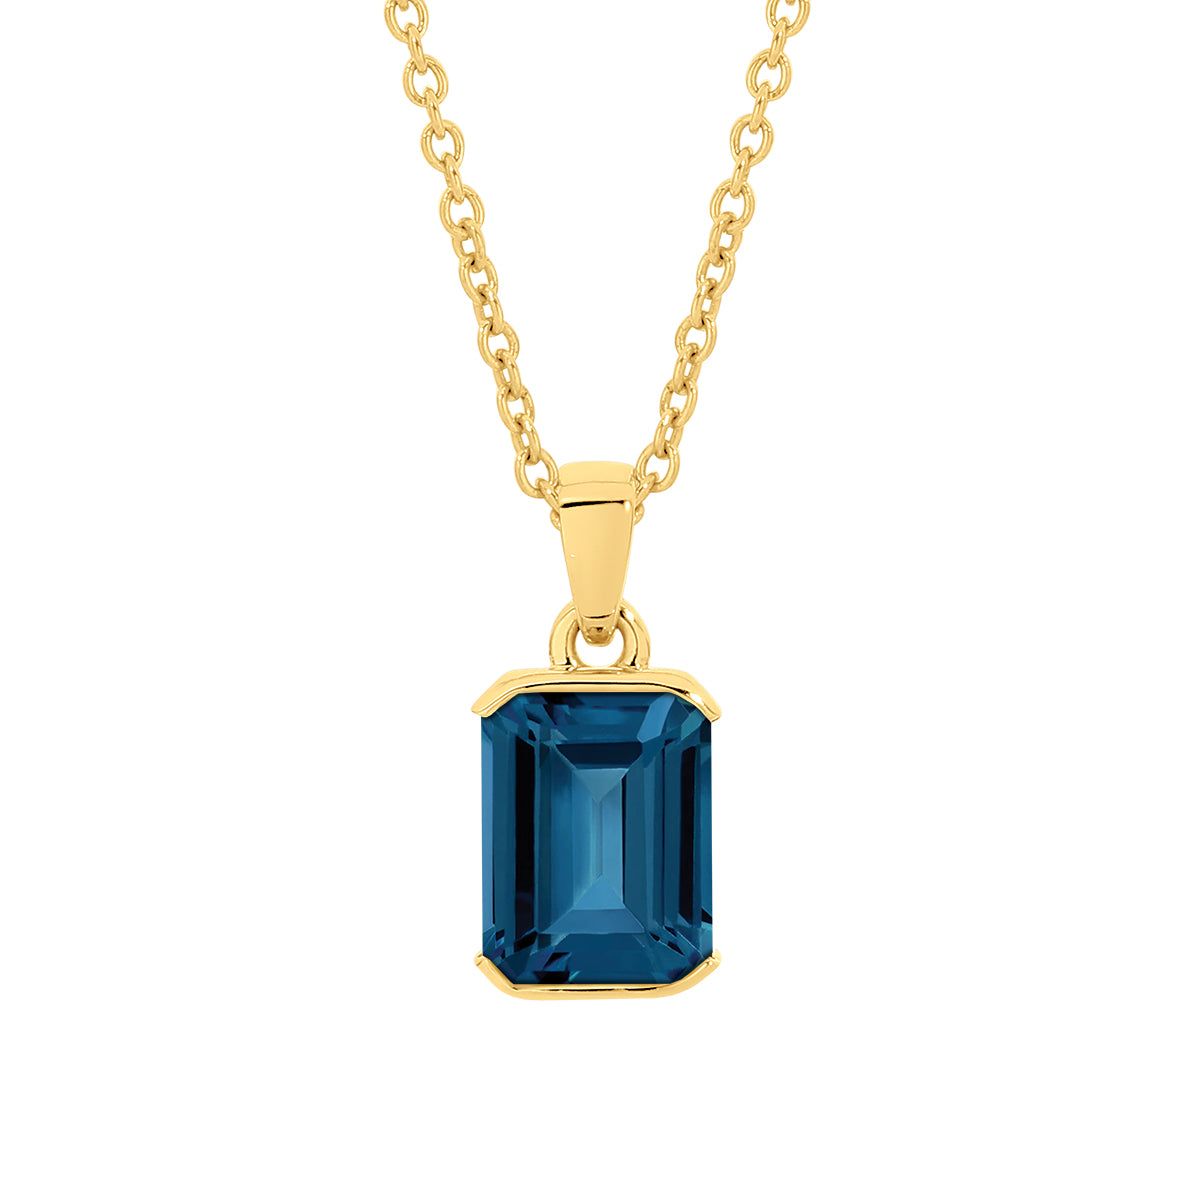 Natural 2.00ct emerald cut London Blue Topaz pendant in 18ct yellow gold